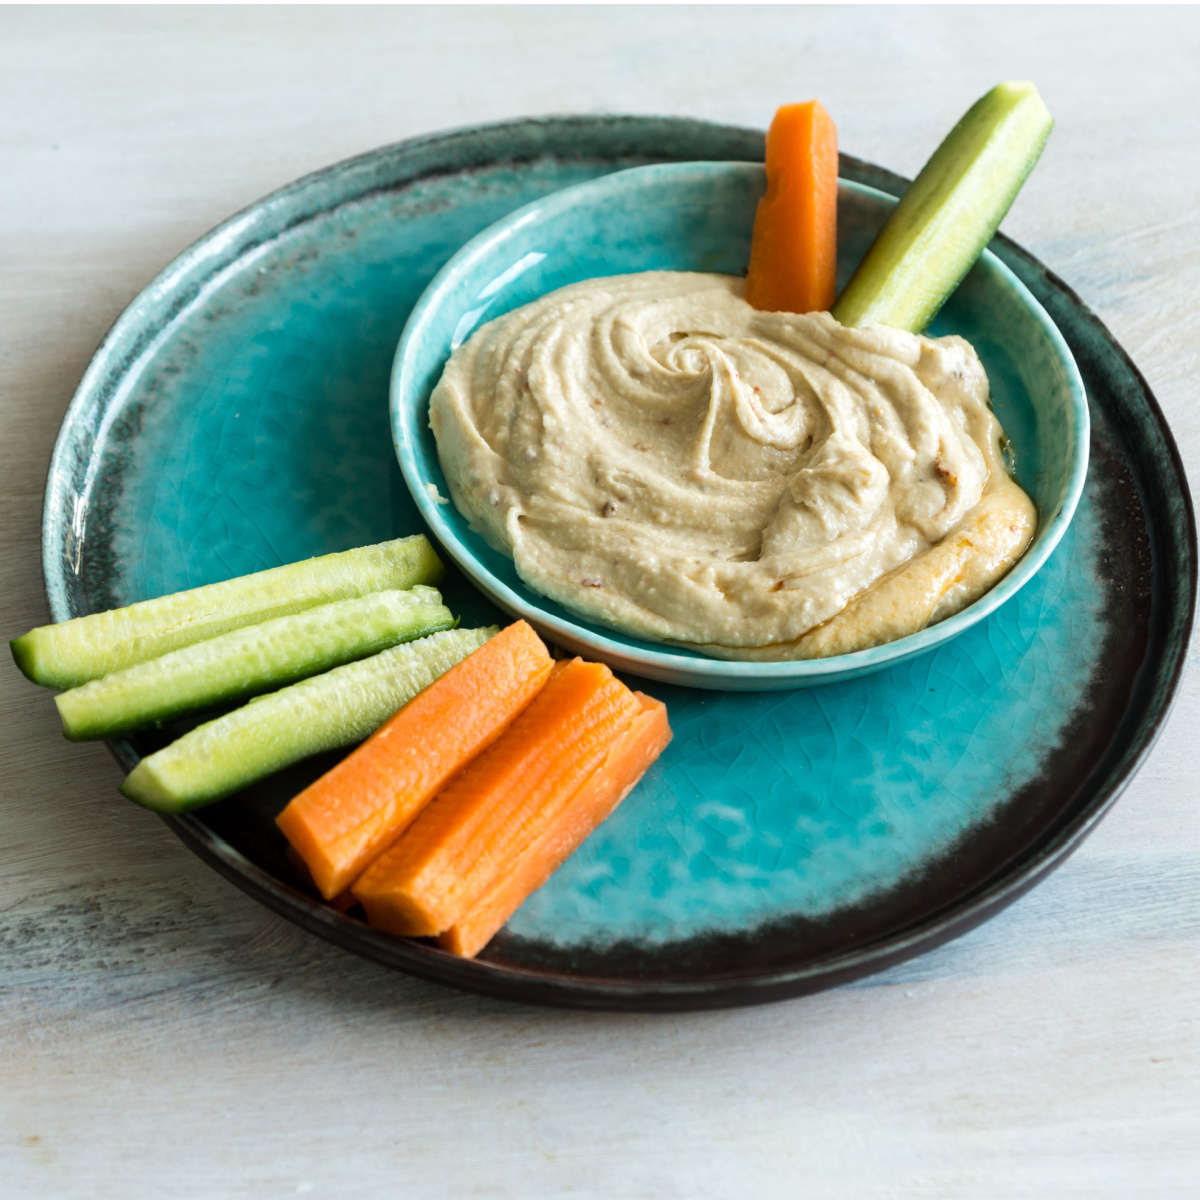 cucumber and carrot sticks with hummus